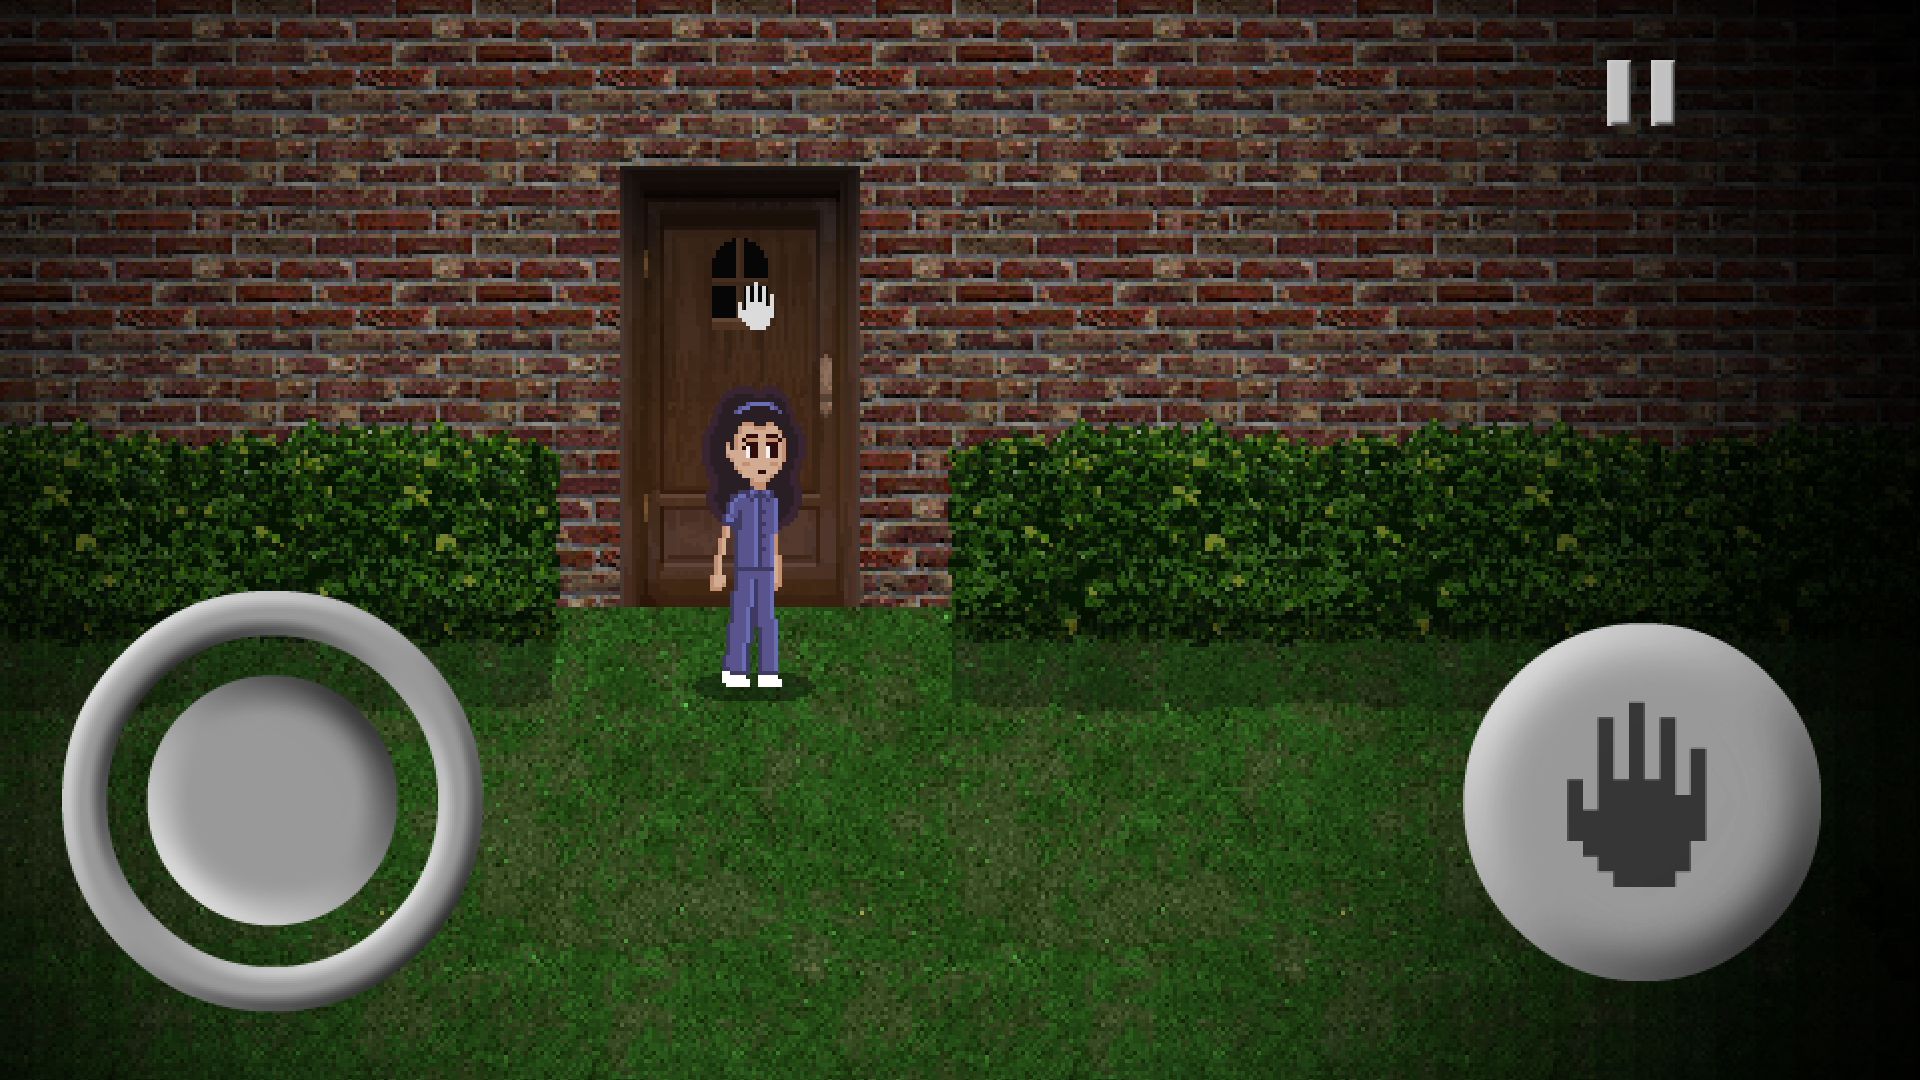 Mr. Hopp's Manor Escape - Android game screenshots.